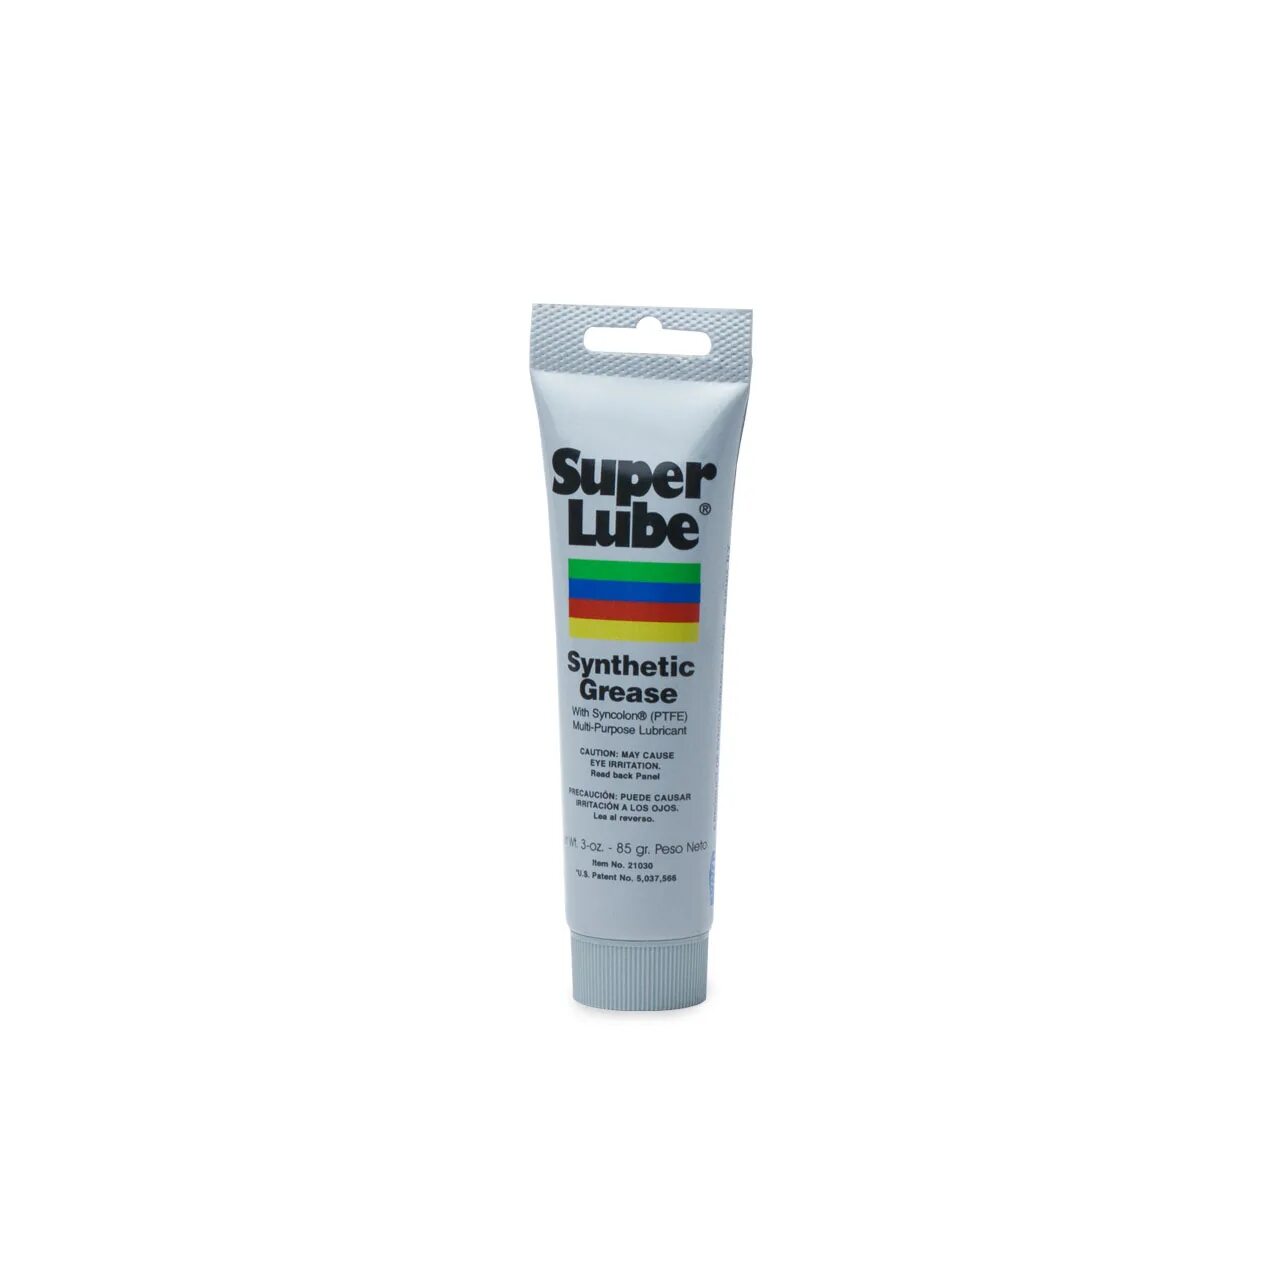 Super lube. Super Lube Synthetic Grease 21030. Смазка контактная super Lube Synthetic Grease 21030 85g. Смазка super Lube Synthetic Grease. GM 12371287 super Lube смазка.